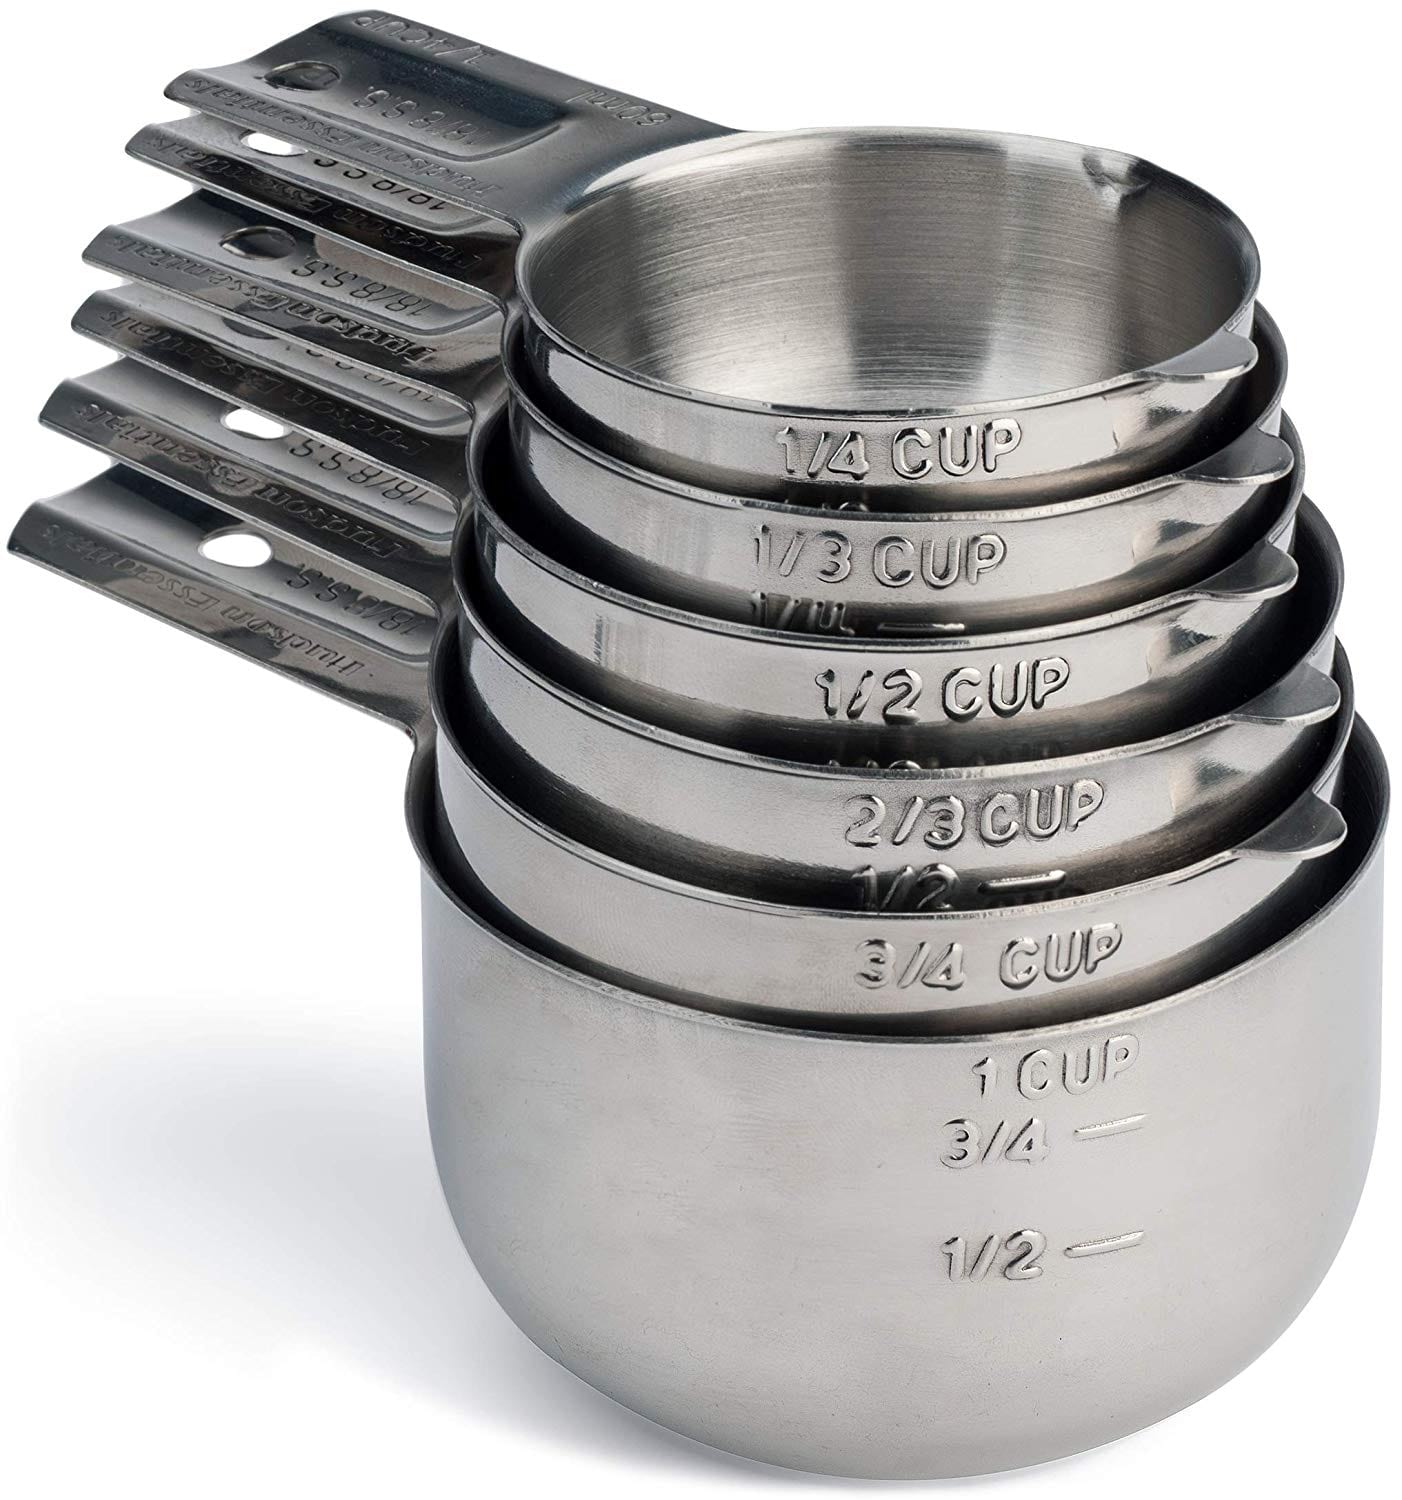 Measuring Cups Sets for sale in City-By-The Sea, Texas